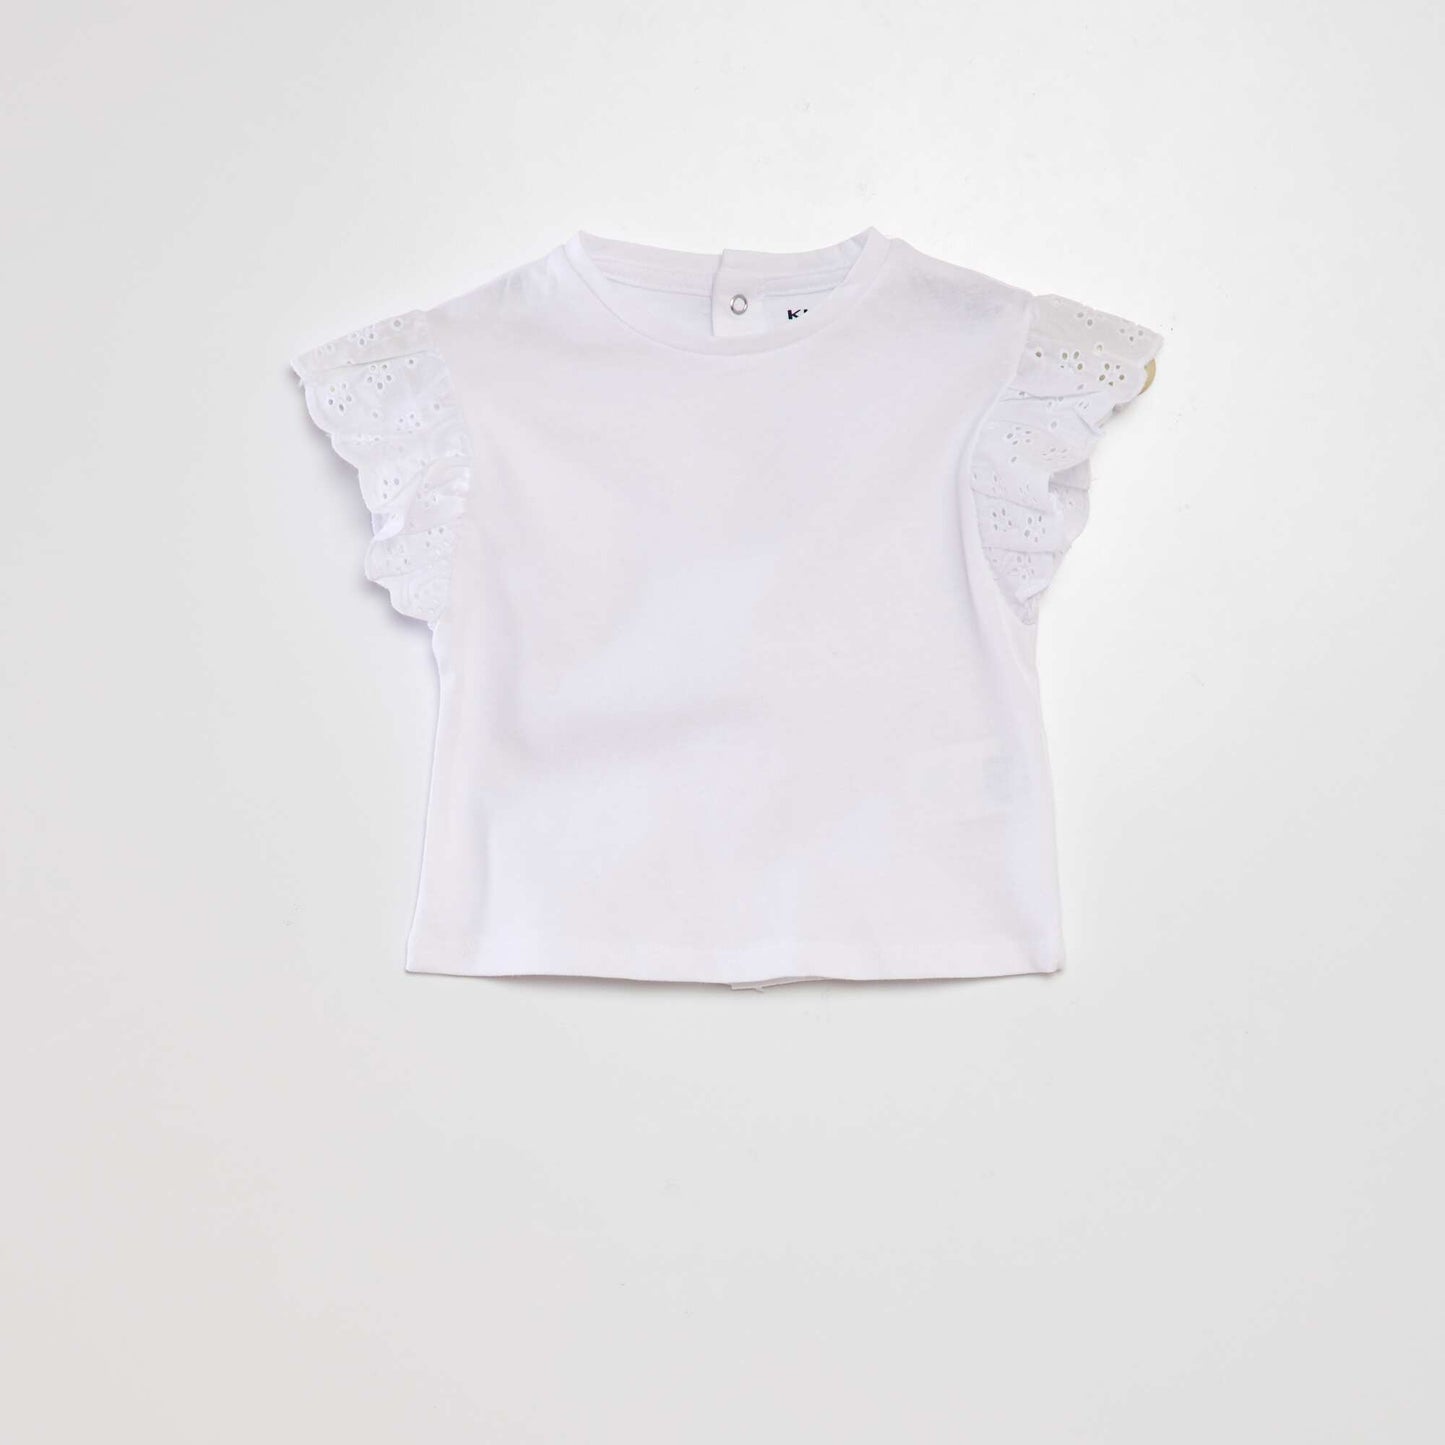 Tee-shirt avec manches broderie anglaise Blanc